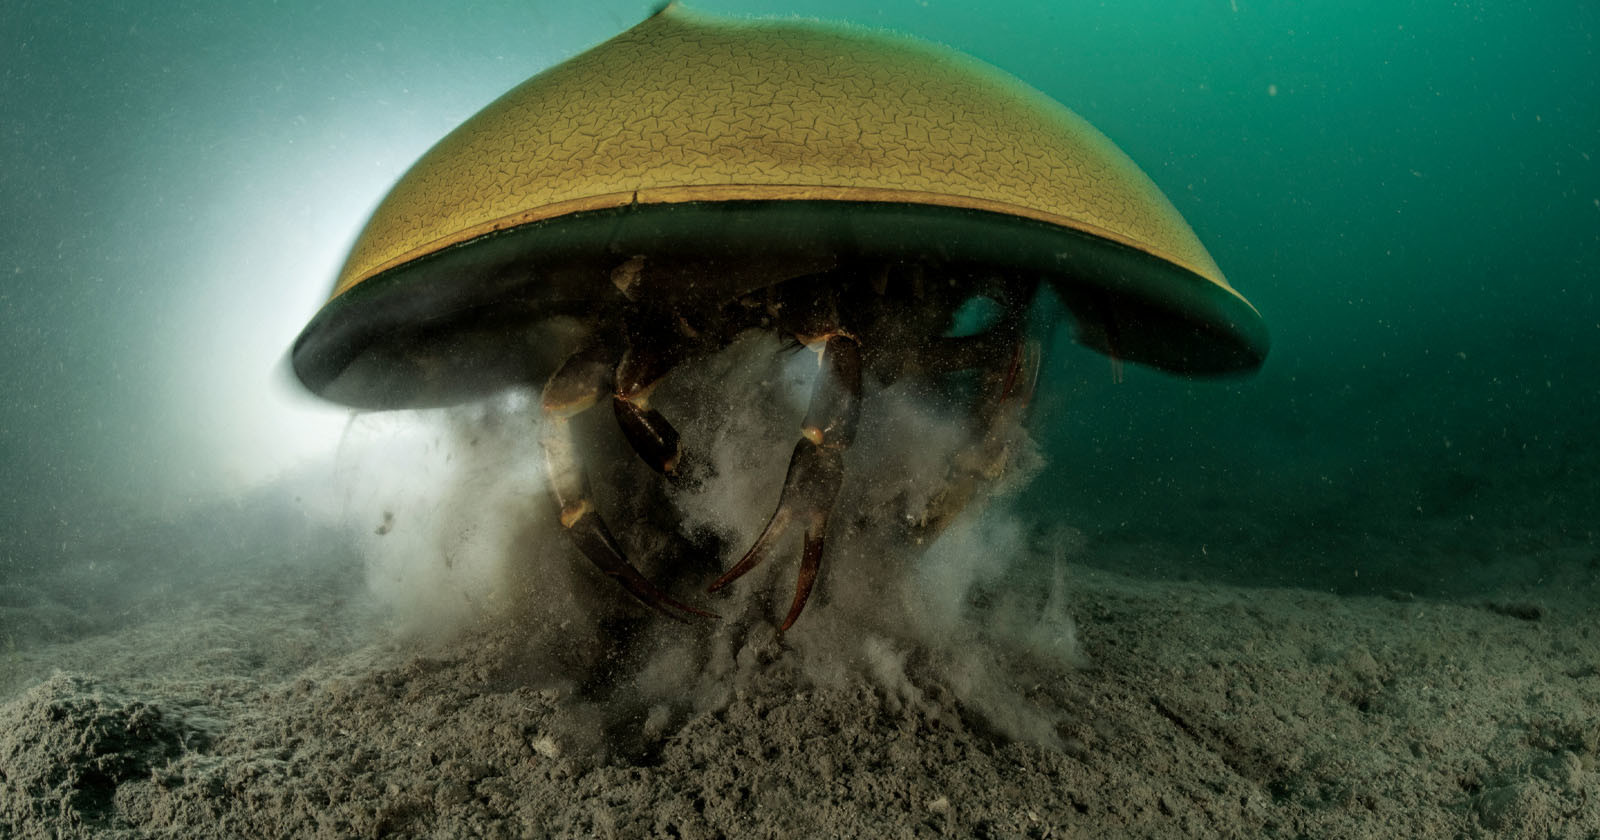 A Closer Look at Horseshoe Crabs, an Ancient and Valuable Animal